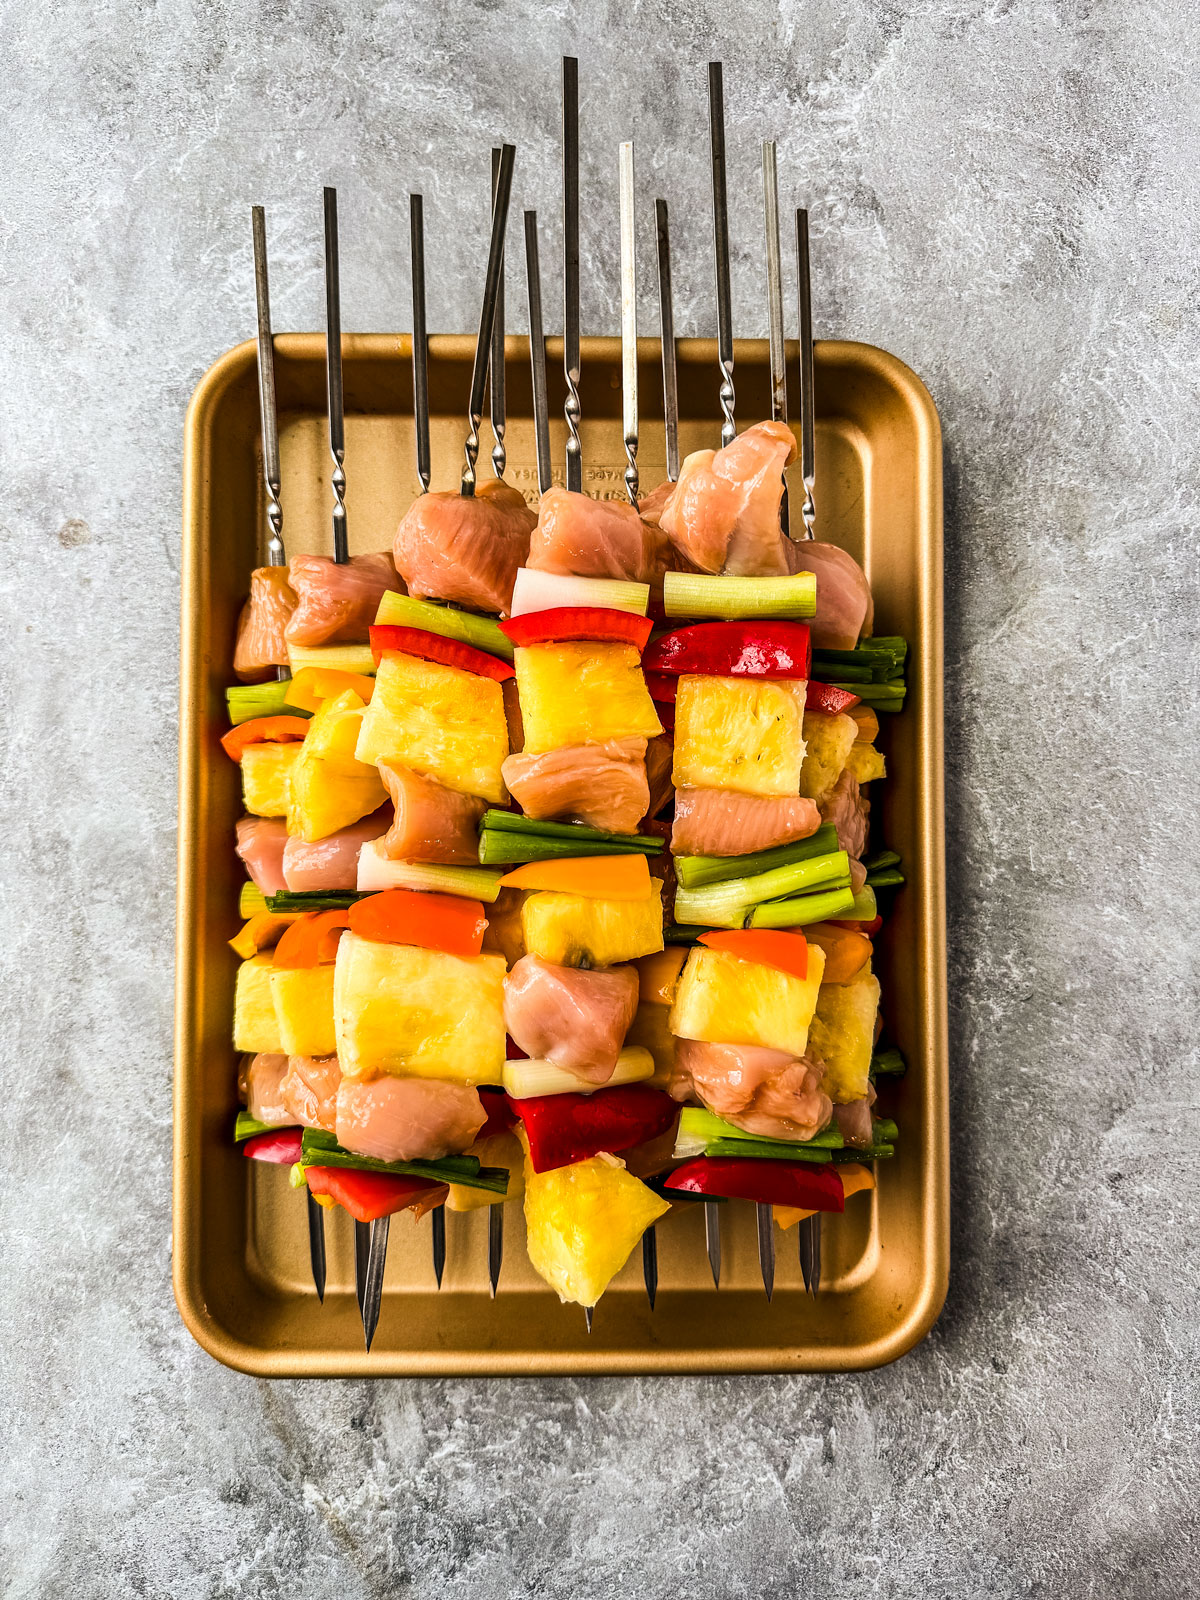 Uncooked pineapple chicken and veggies on skewers.